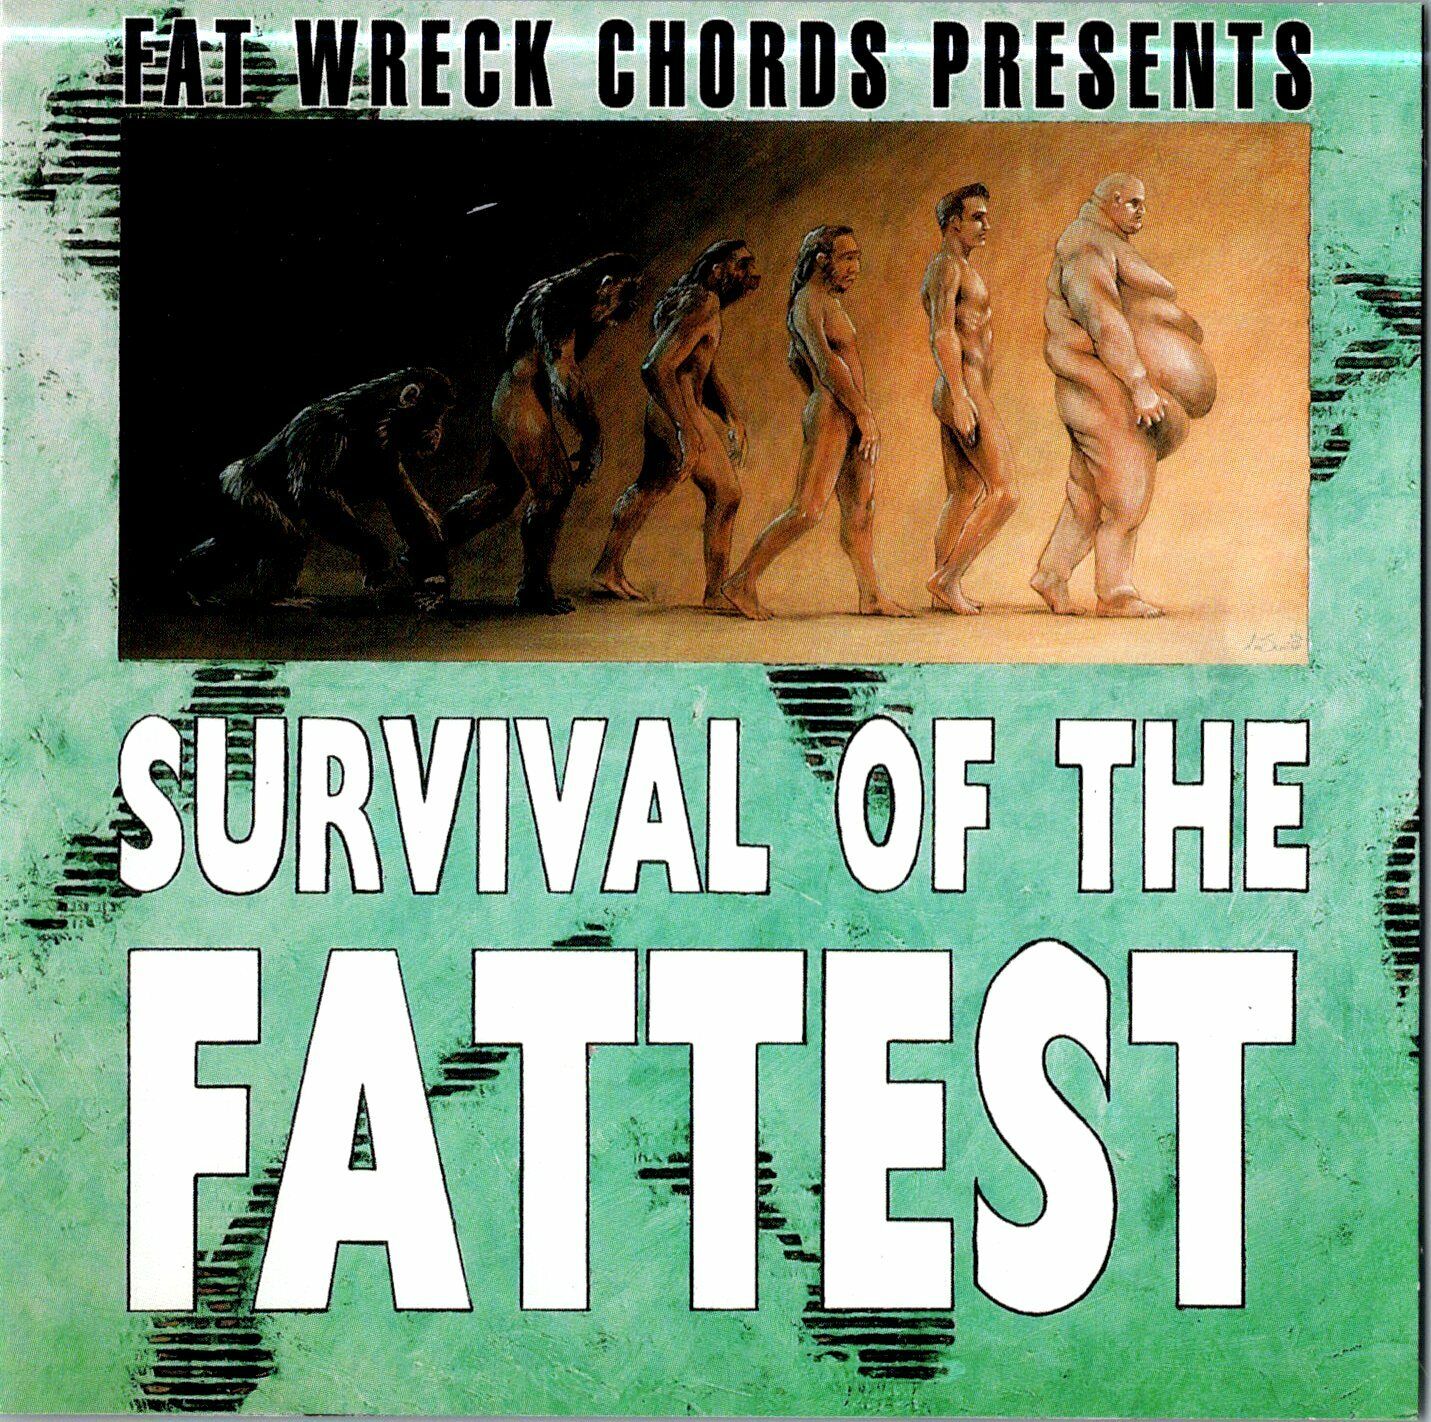 Fat Wreck Chords - Survival of the Fattest - LP